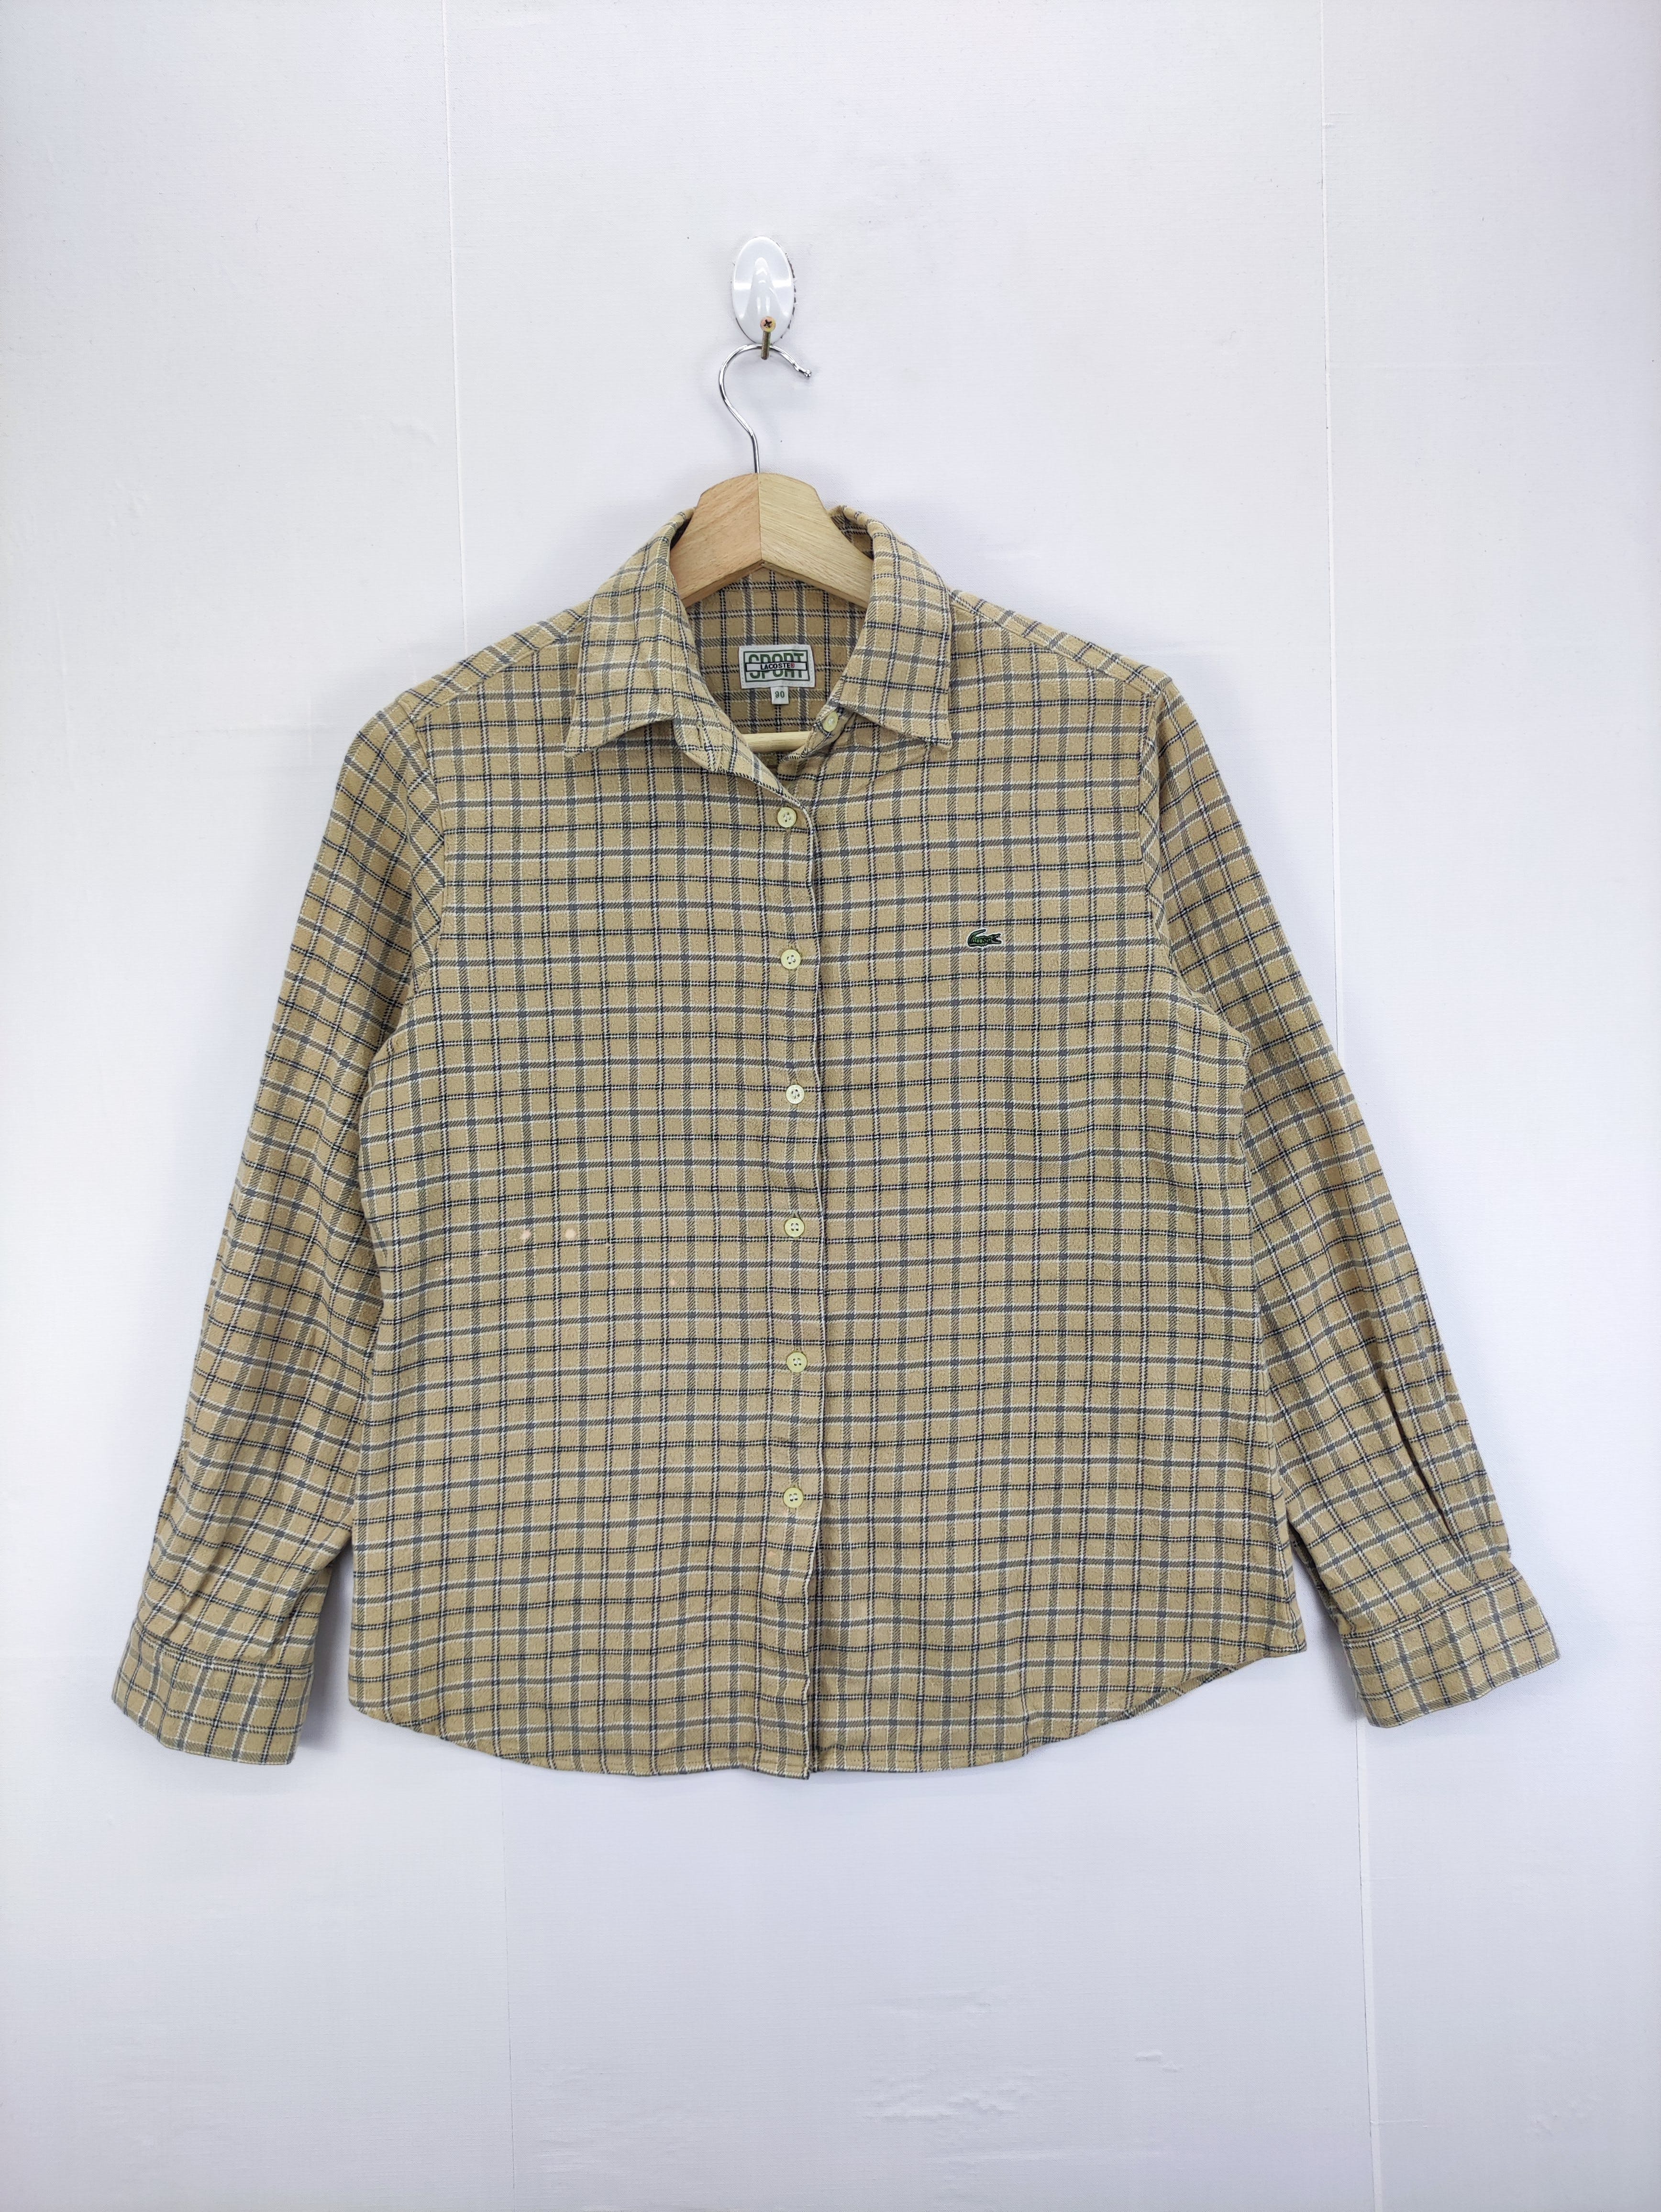 Vintage Lacoste Sports Checkered Shirt Button Up - 1